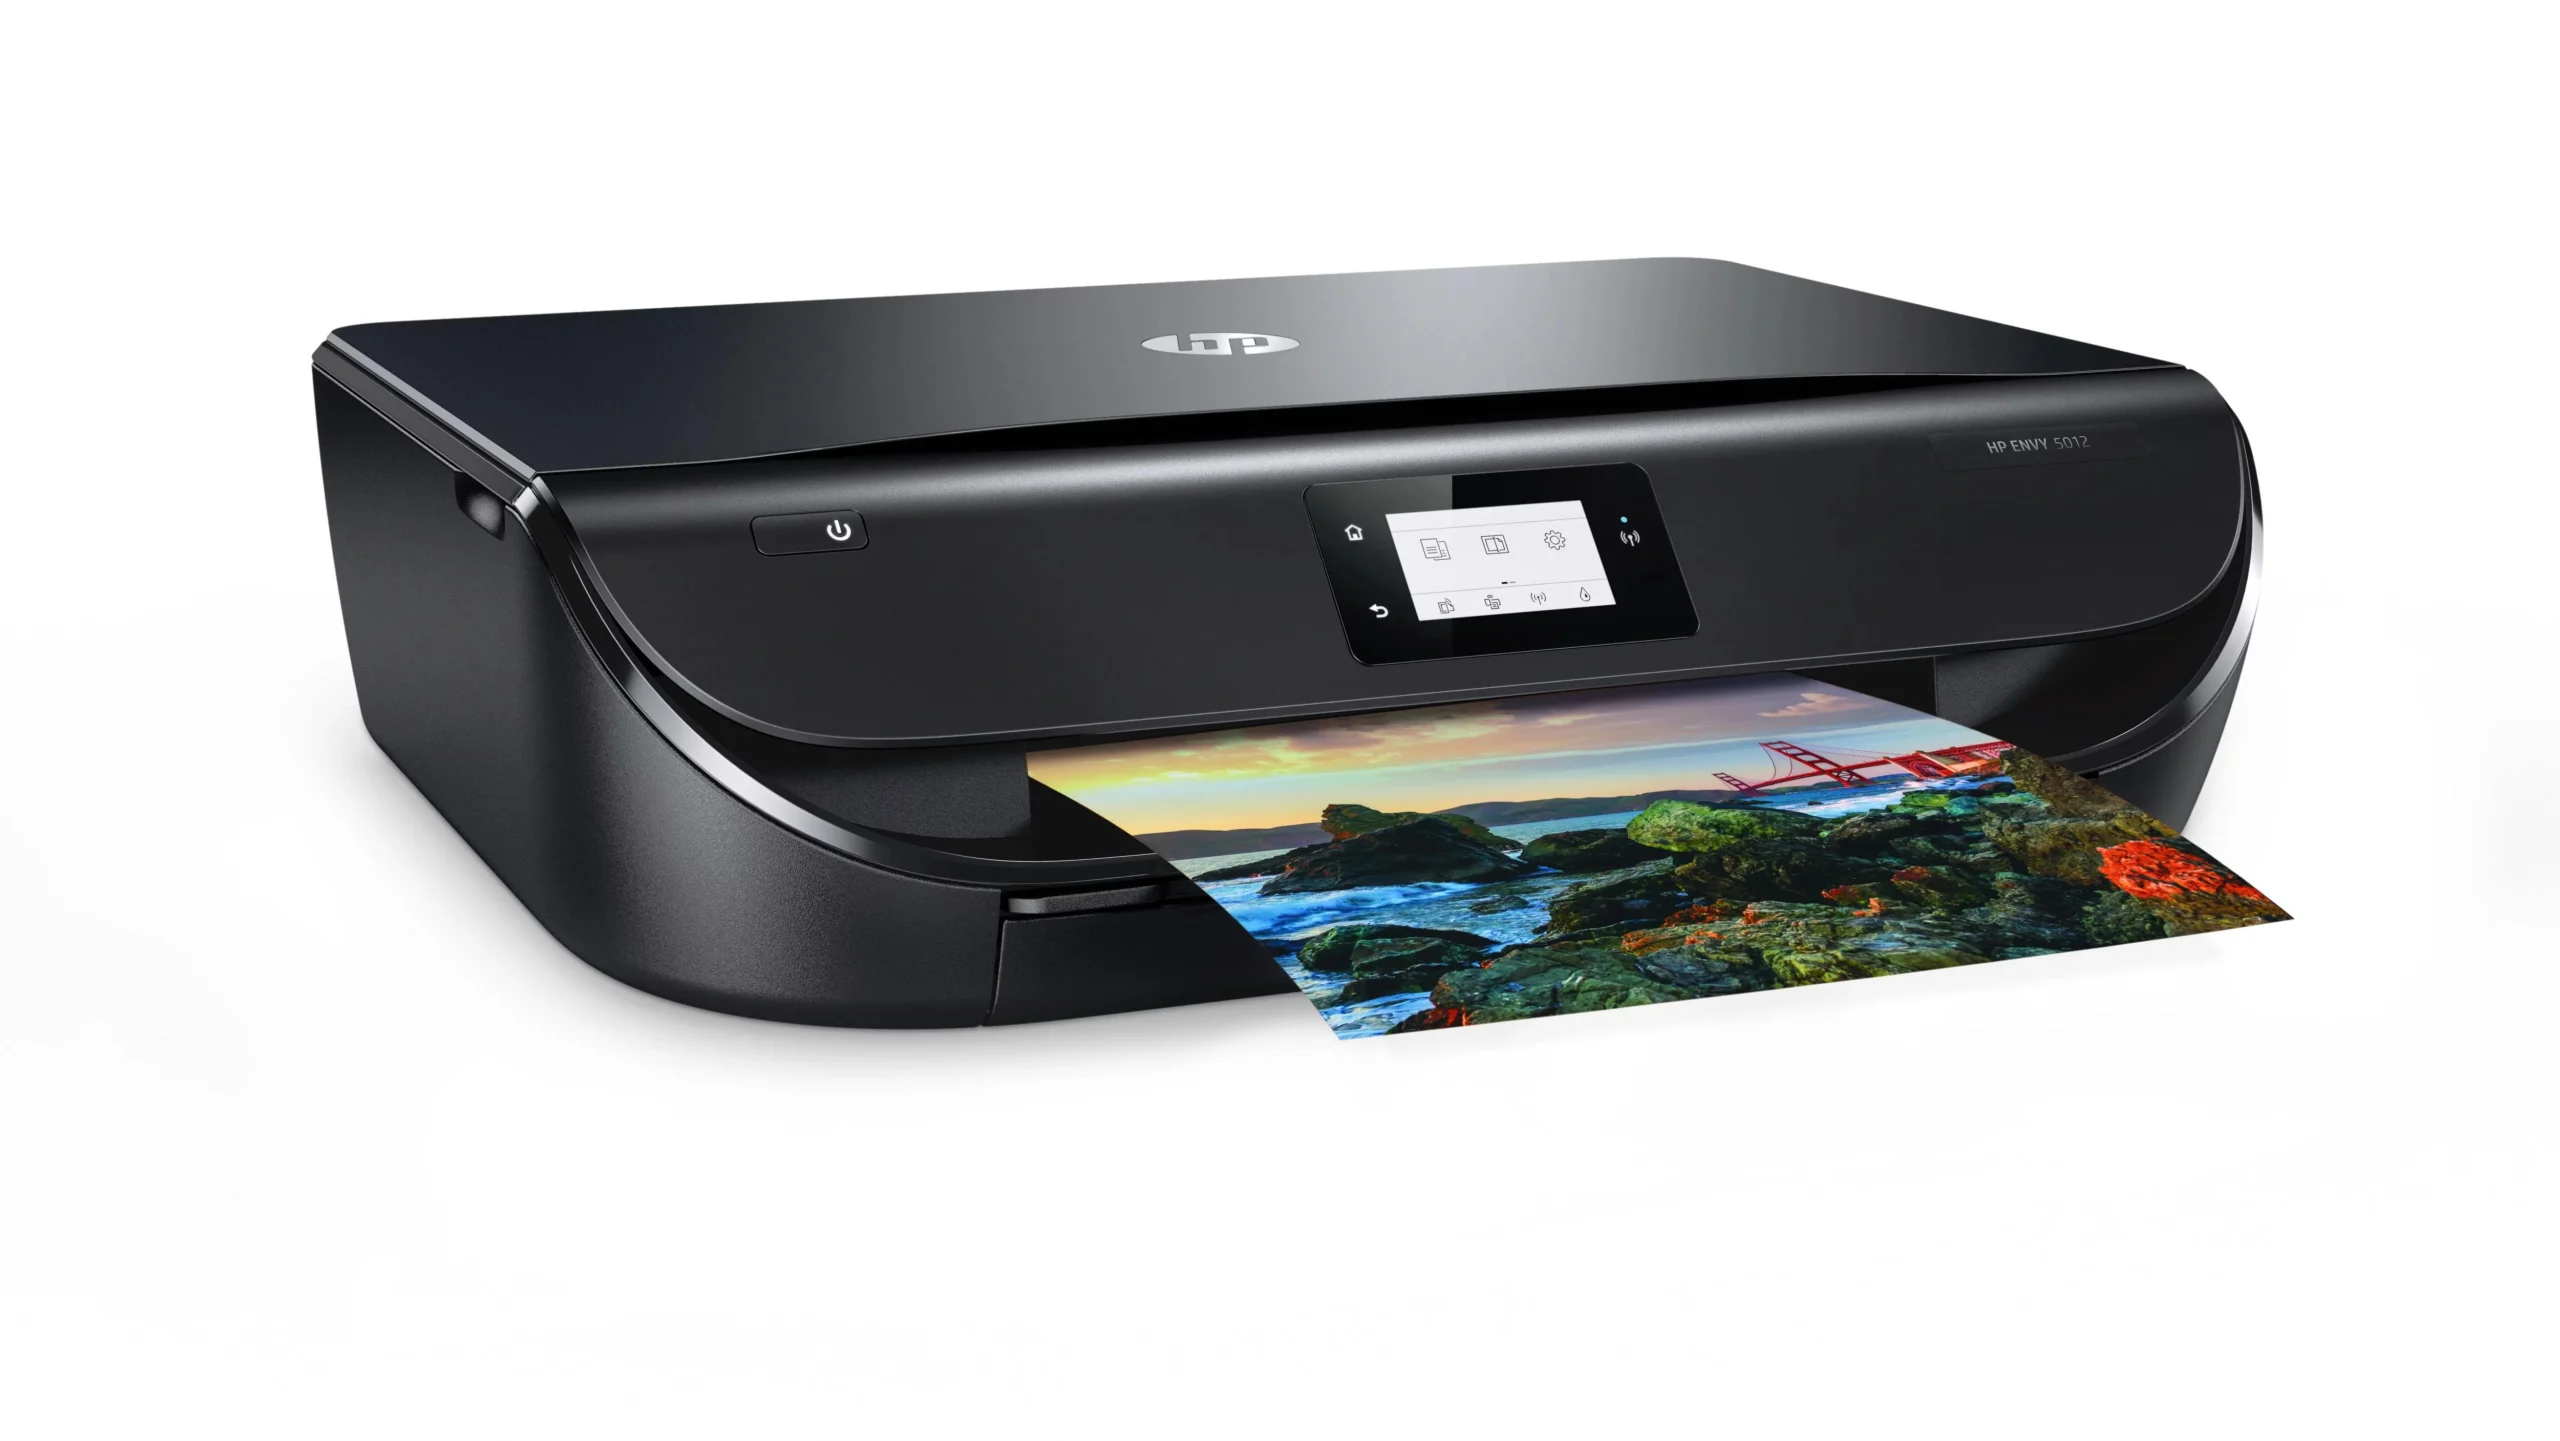 hewlett packard printer 5012 drivers - How do I connect my HP Envy 5012 to my computer